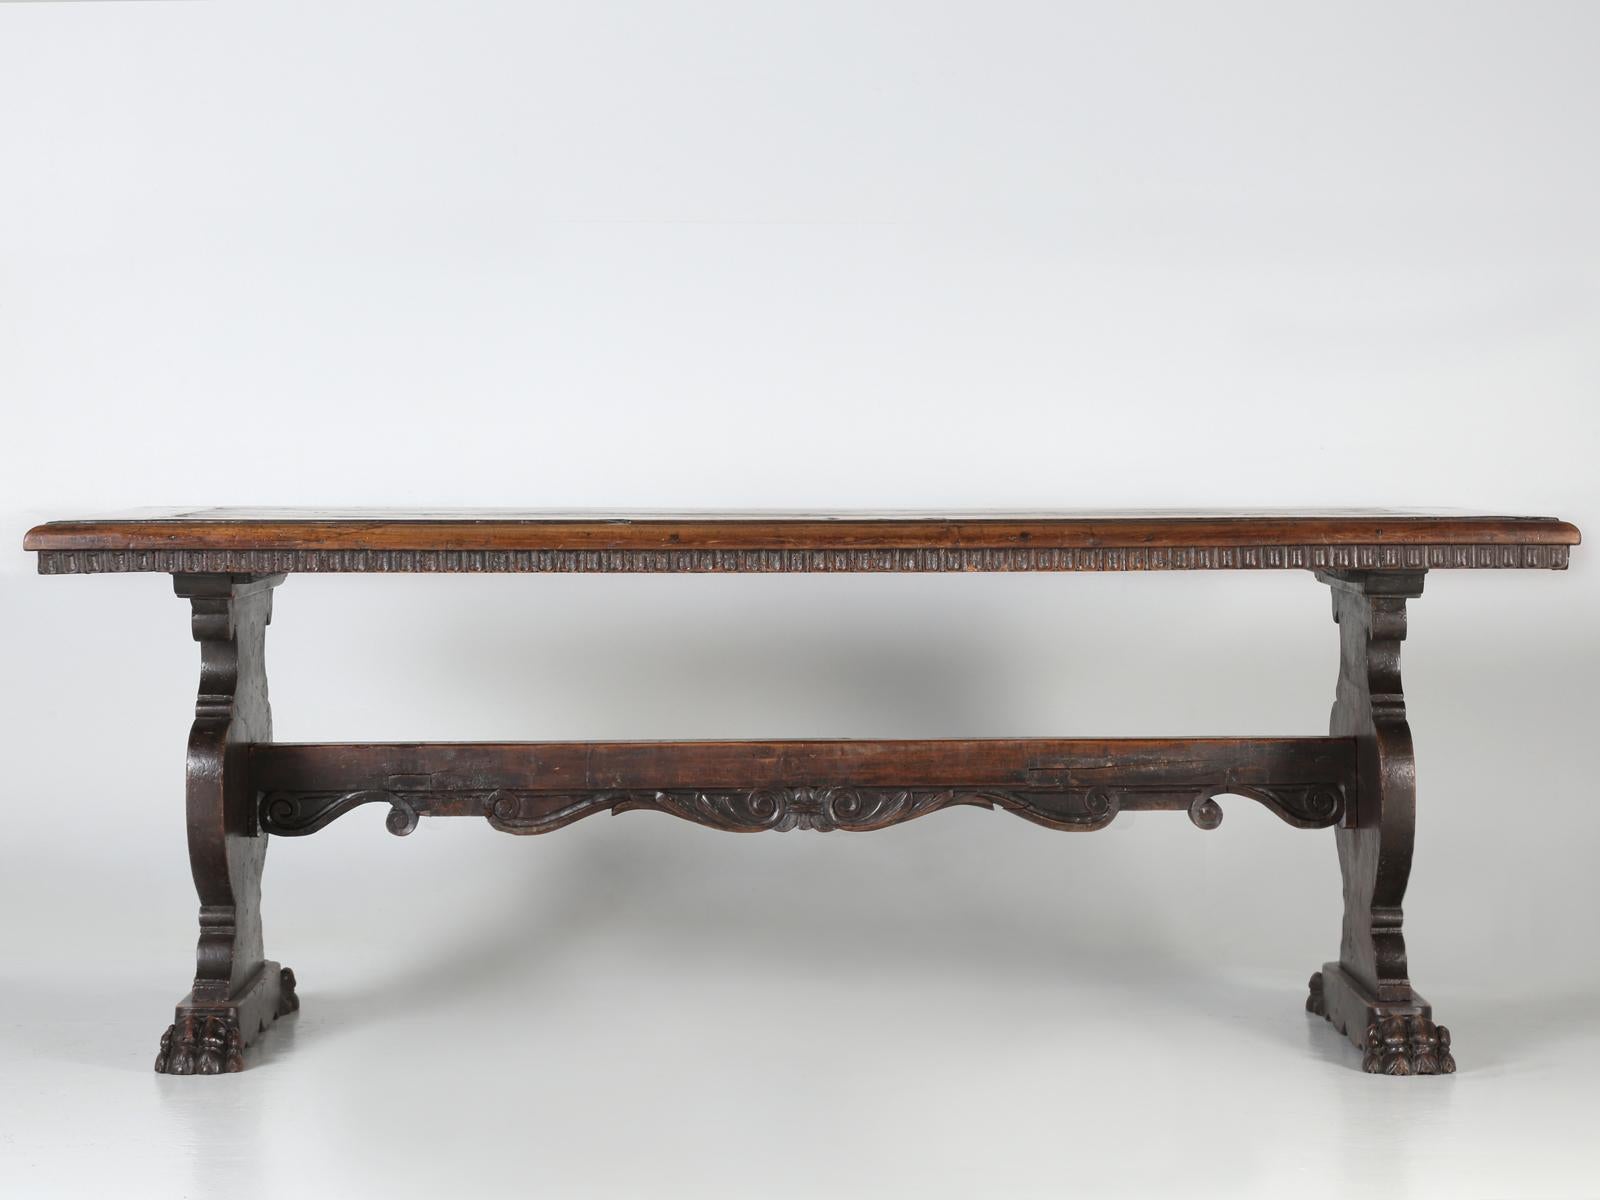 Early 19th Century Antique French Trestle Dining Table with a Fleur-de-Lys Design Motif